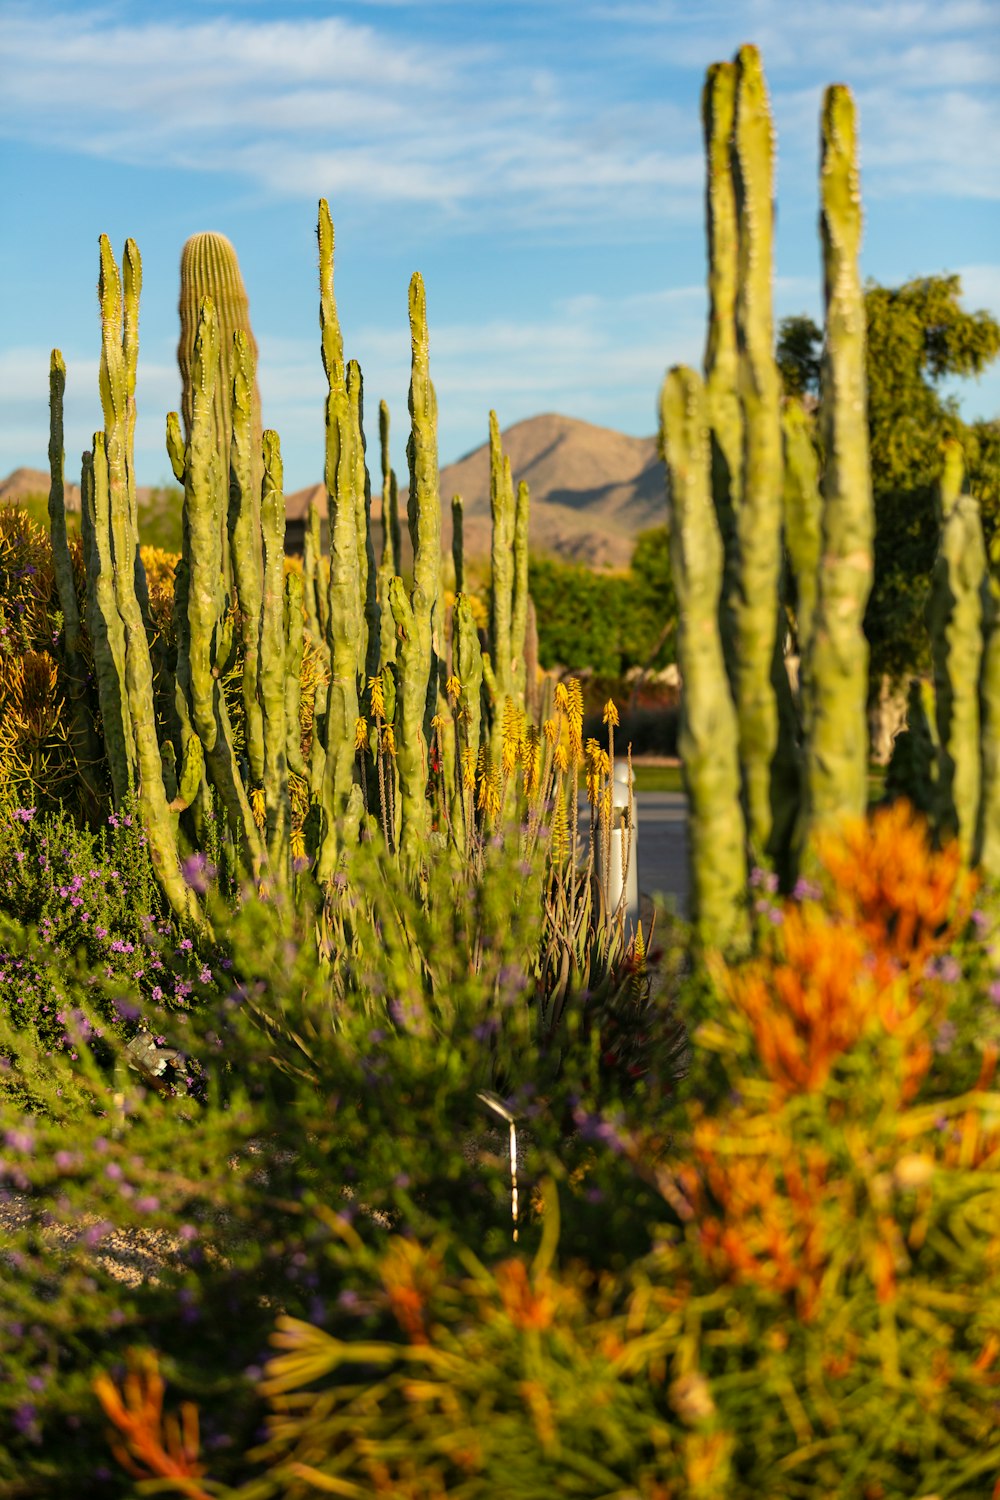 a large group of cactus plants in a garden